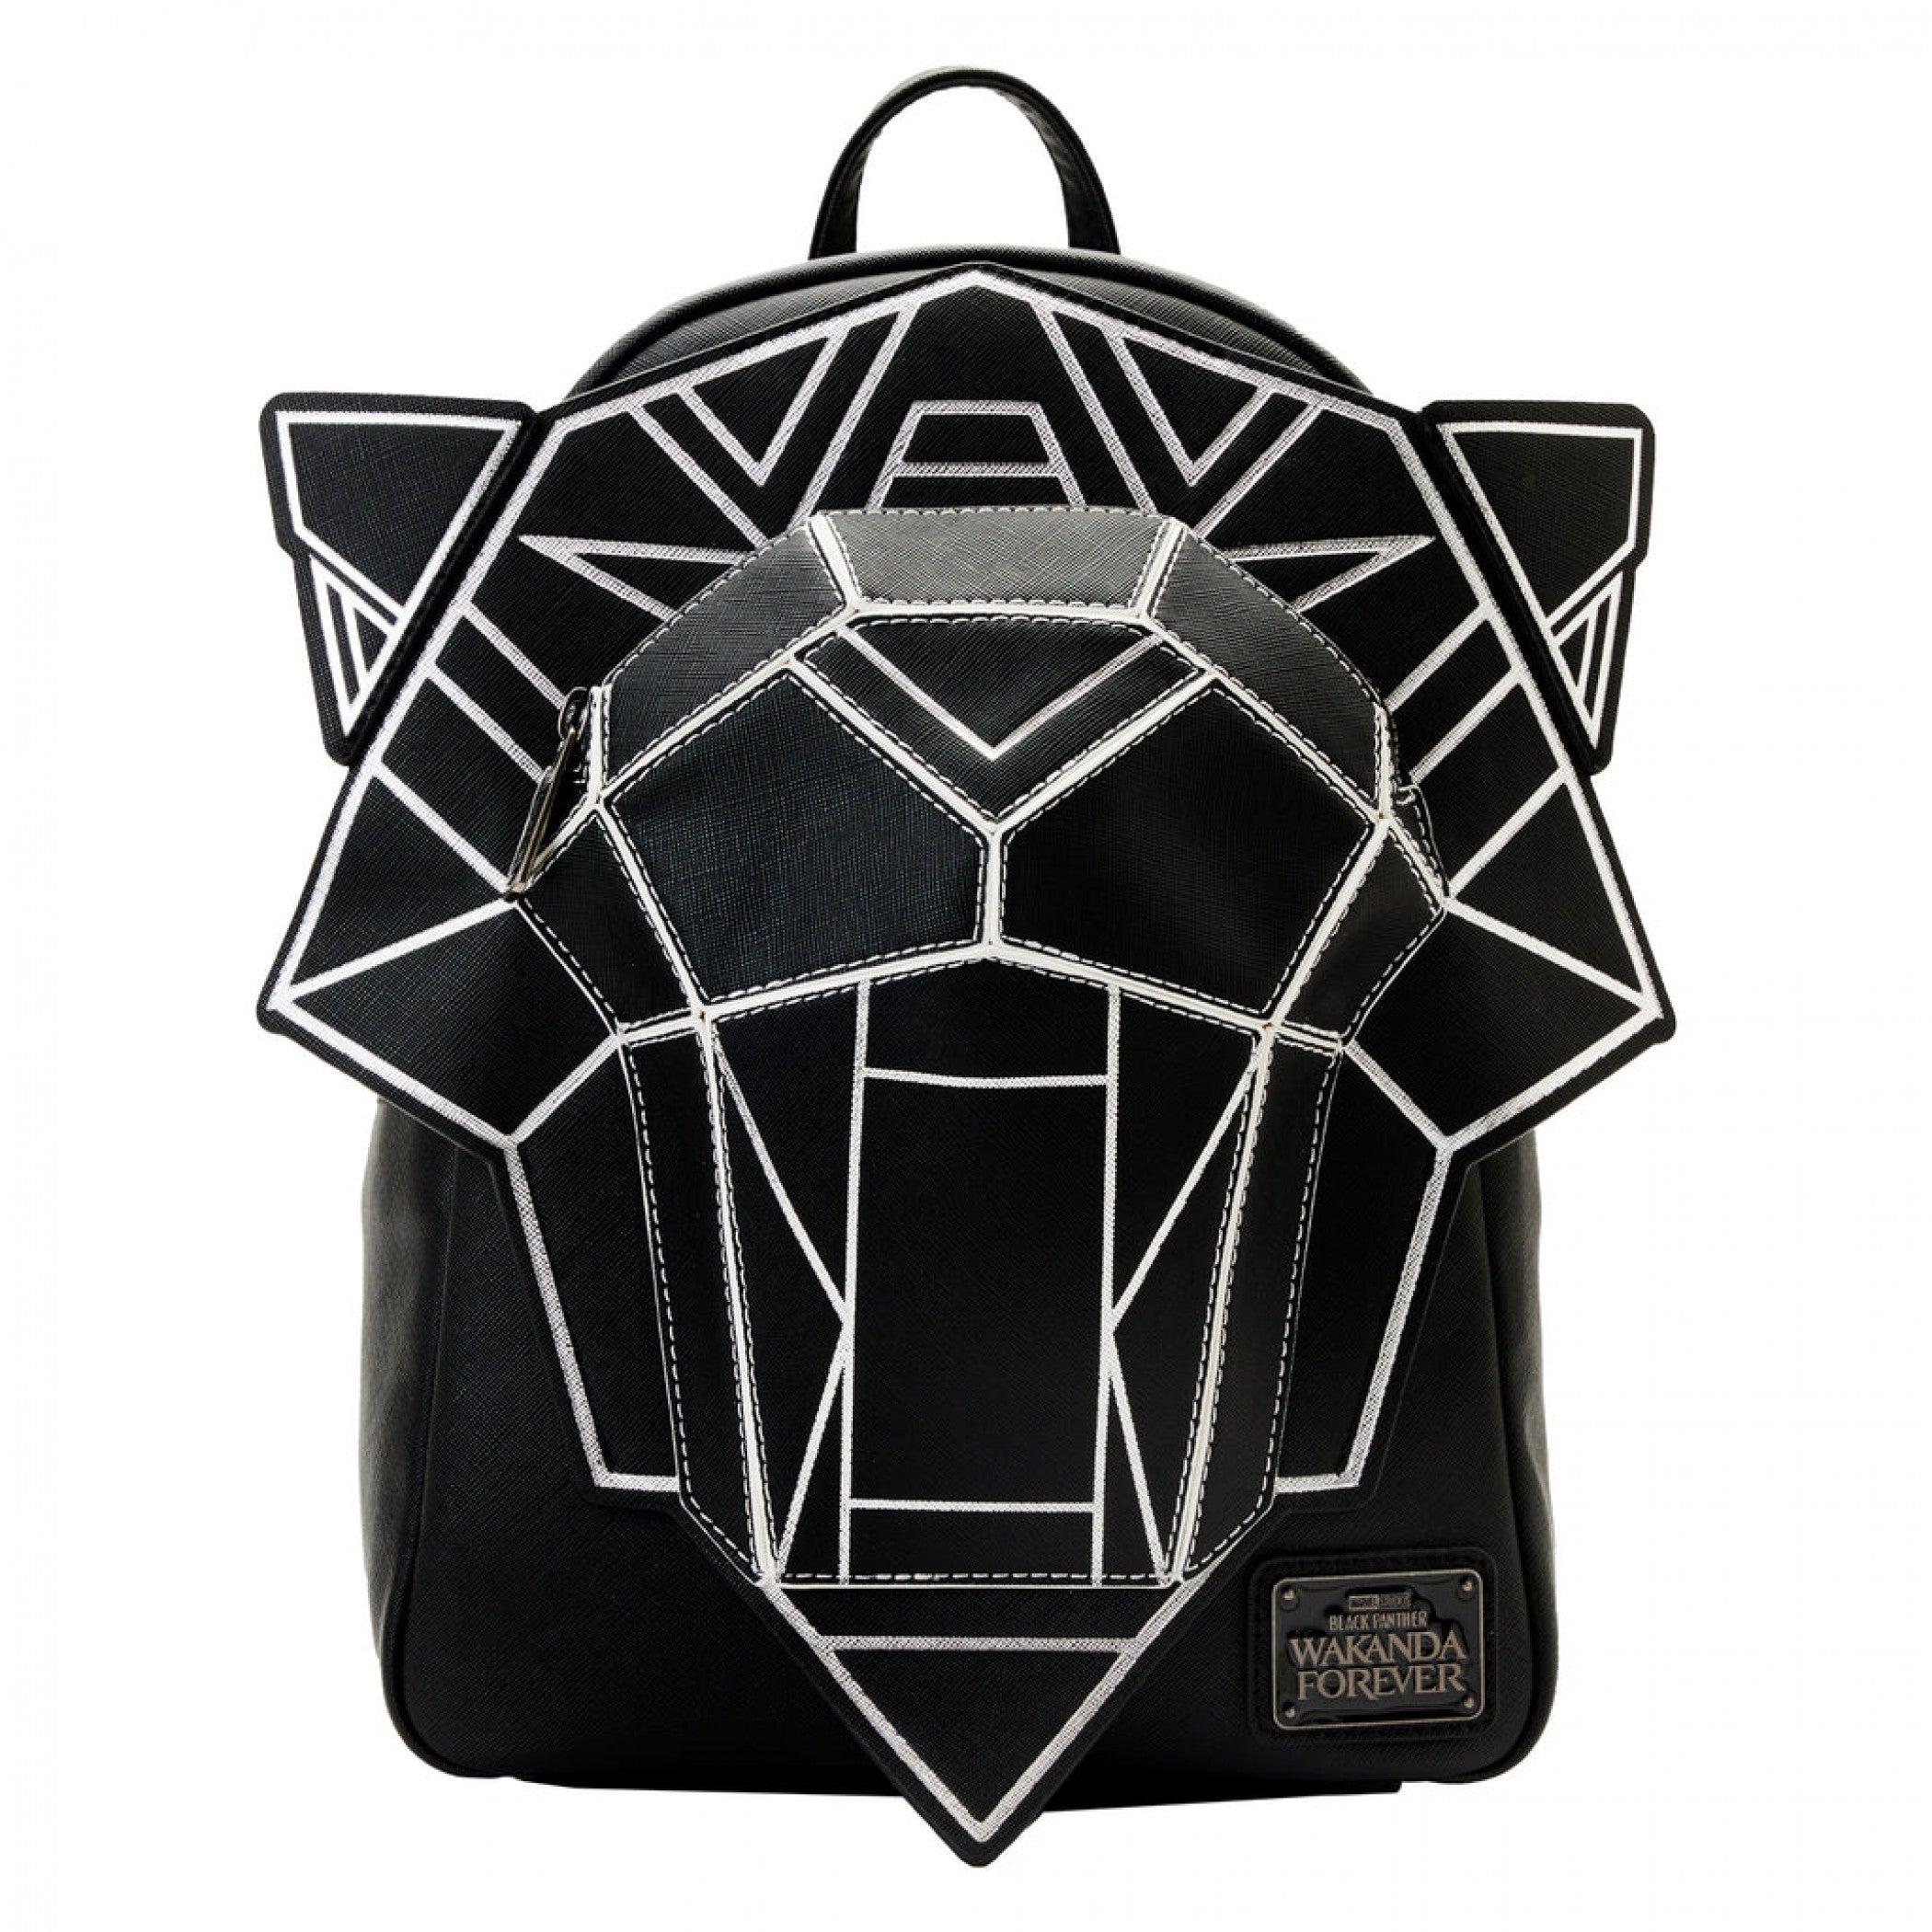 title:Black Panther Wakanda Forever Figural Mini Backpack By Loungefly;color:Black